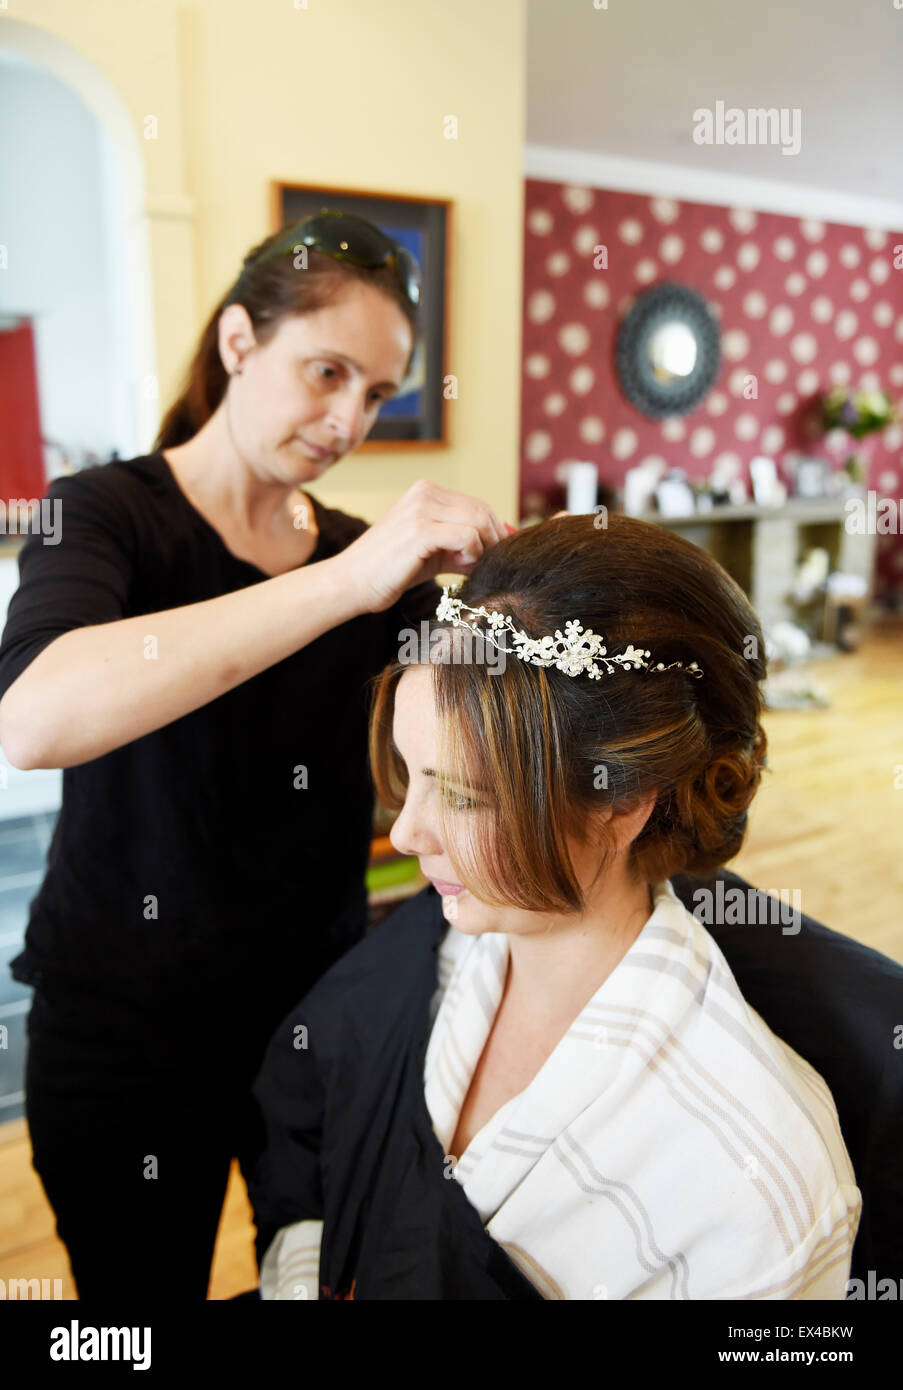 Young Bride Having Her Wedding Hair Prepared By Hairdresser At